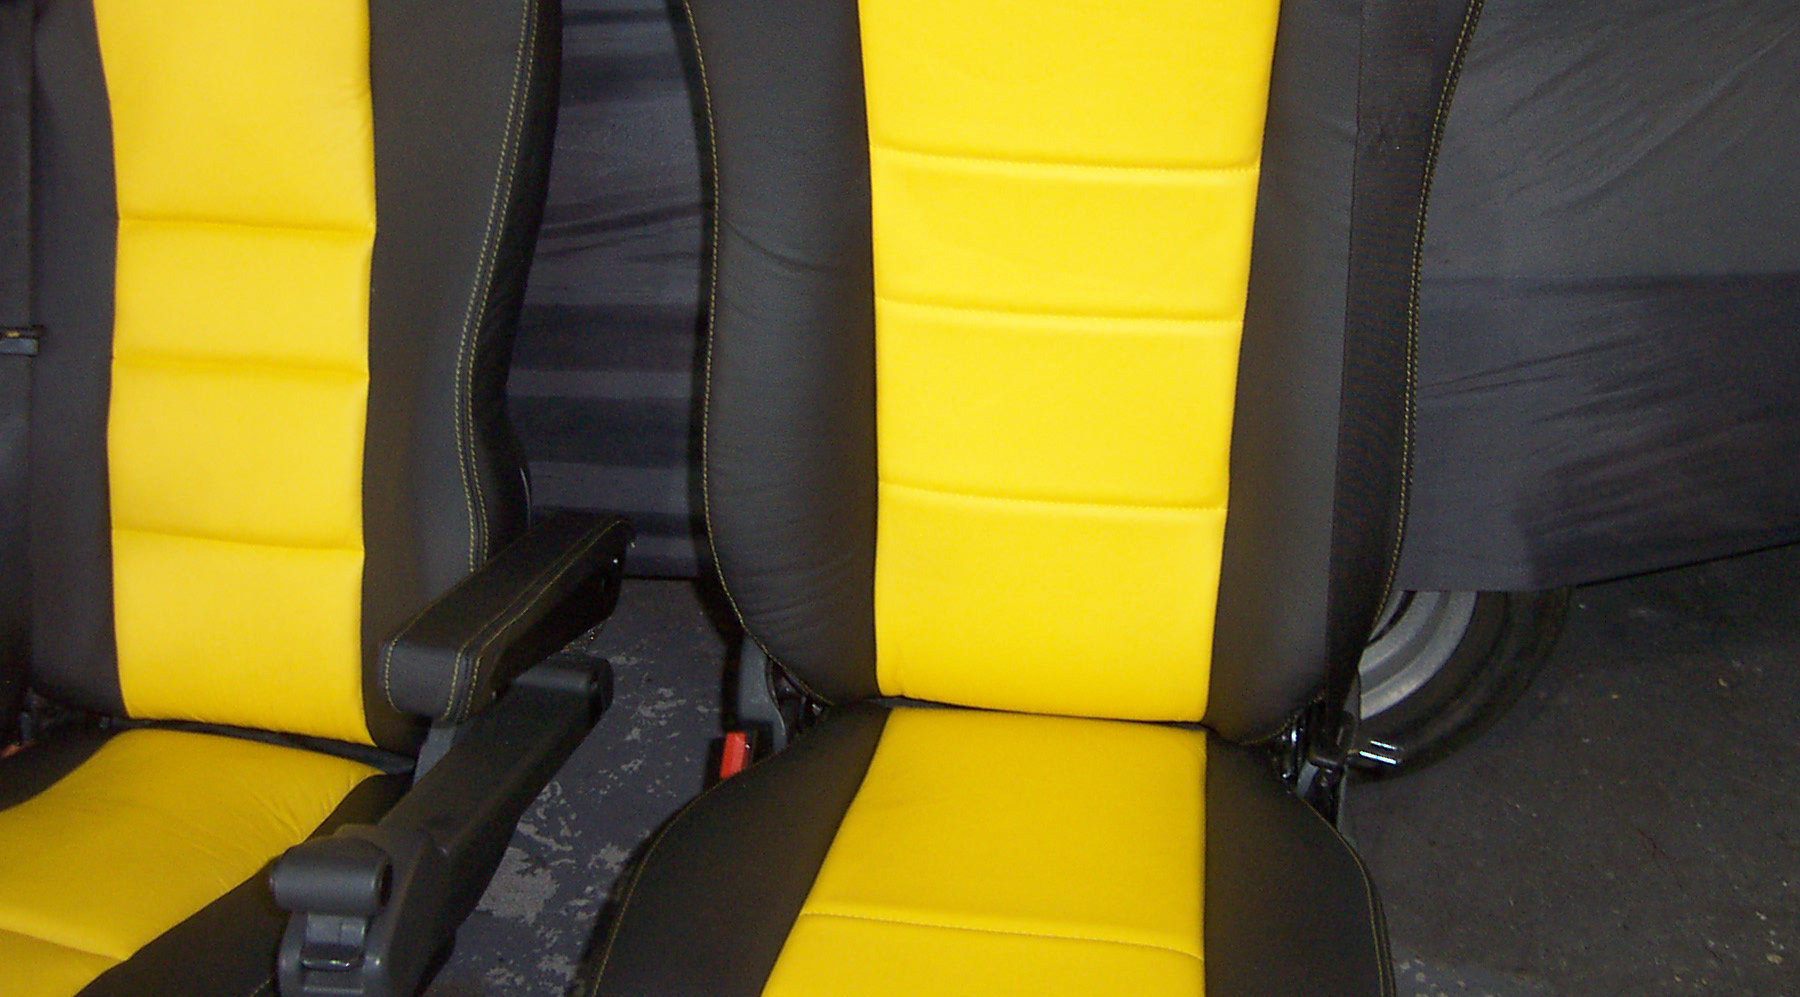 Yellow+and+black+seating+with+yellow+stitching